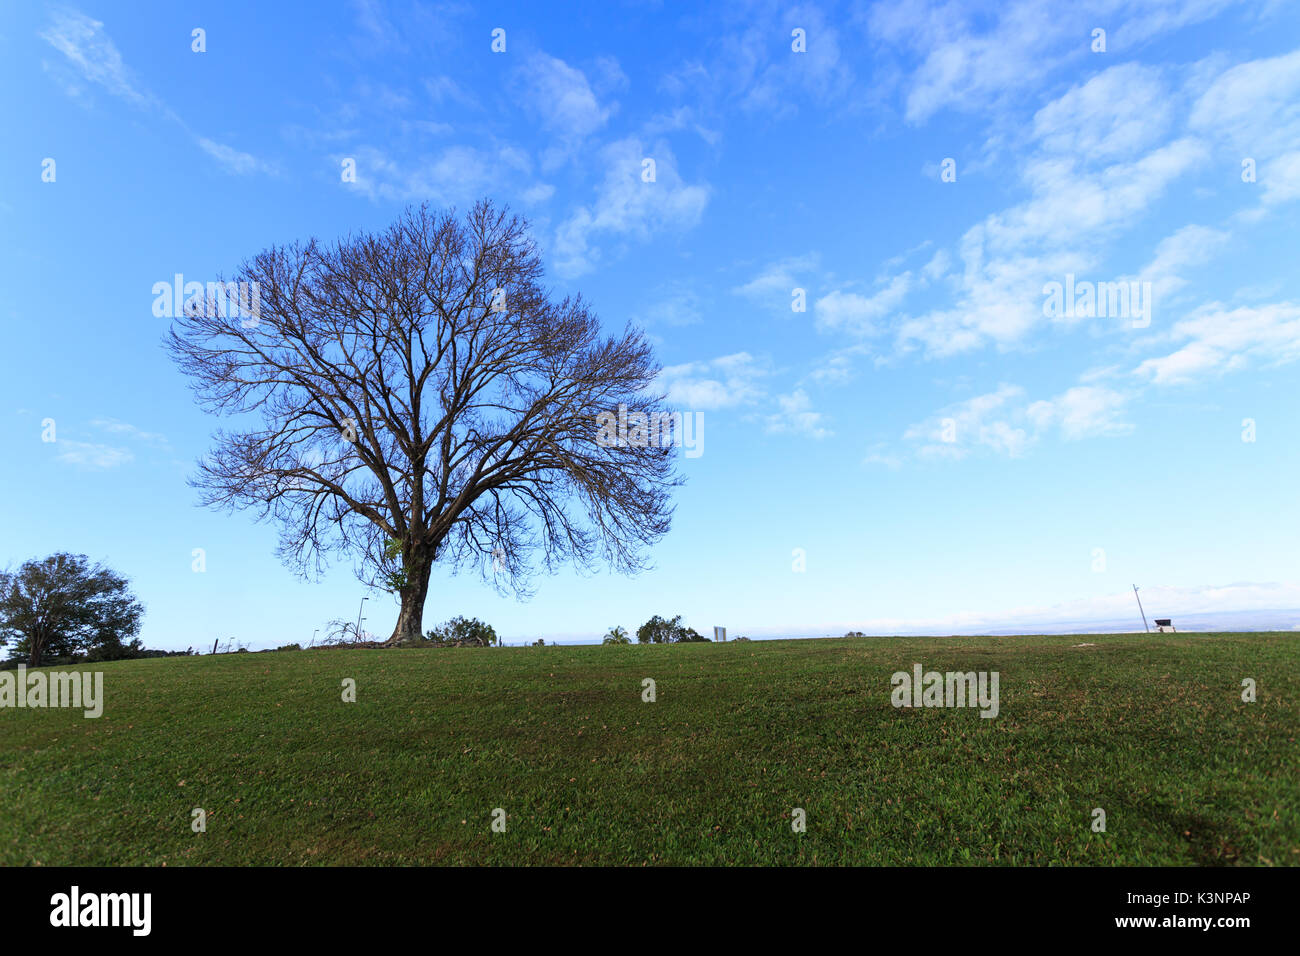 peaceful background of silhouette of a large tree with no leaves on a green hill against blue sky Stock Photo